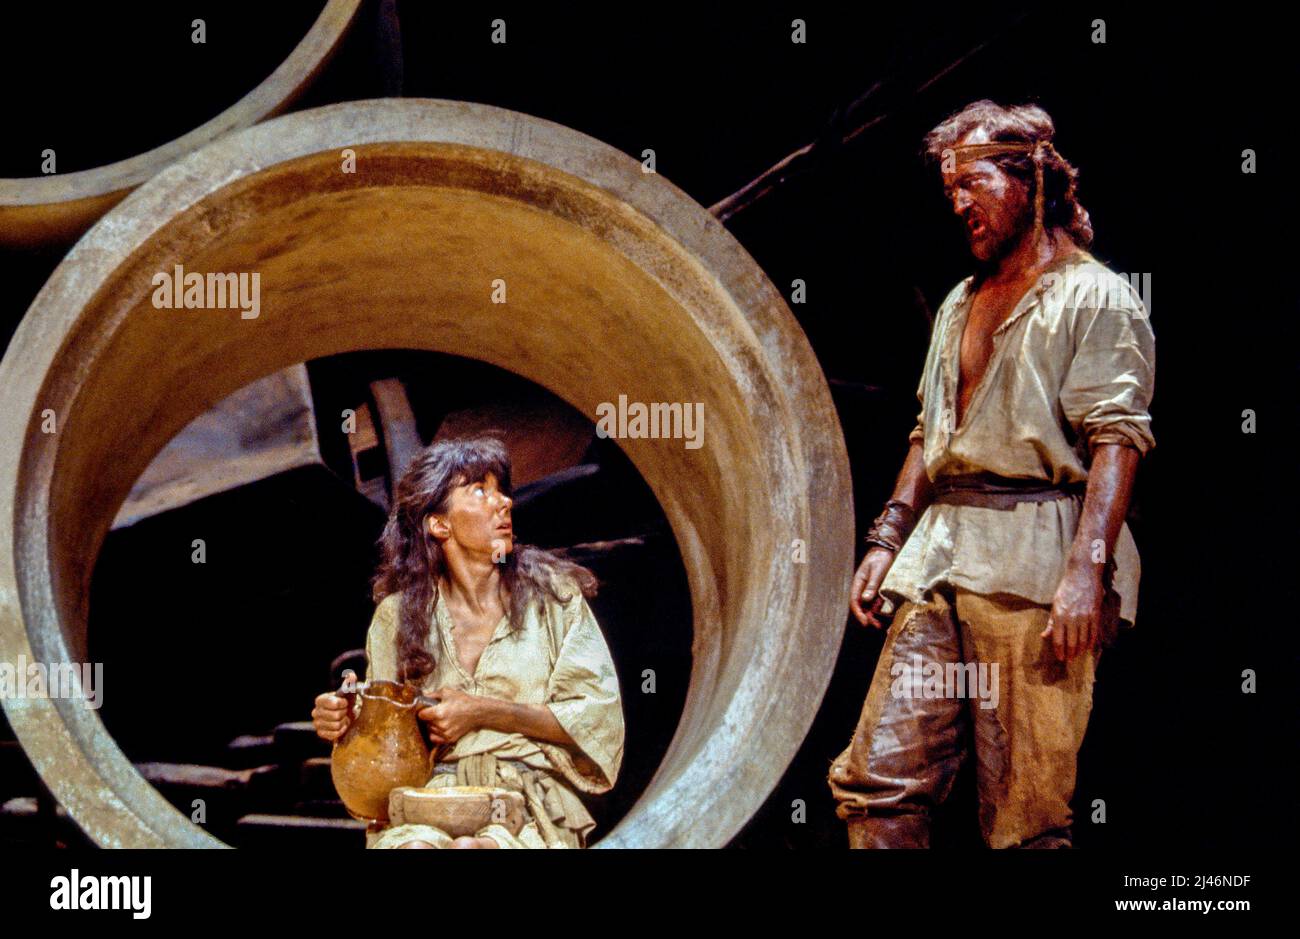 Mary Maddox (Sal Gromer), Ian Hogg (Jeremiah Stiggens) in THEE AND ME by Philip Martin at the Lyttelton Theatre, National Theatre (NT), London SE1  26/02/1980  set design: Sue Plummer  costumes: Lindy Hemming  lighting: Gerry Jenkinson  director: Michael Rudman Stock Photo